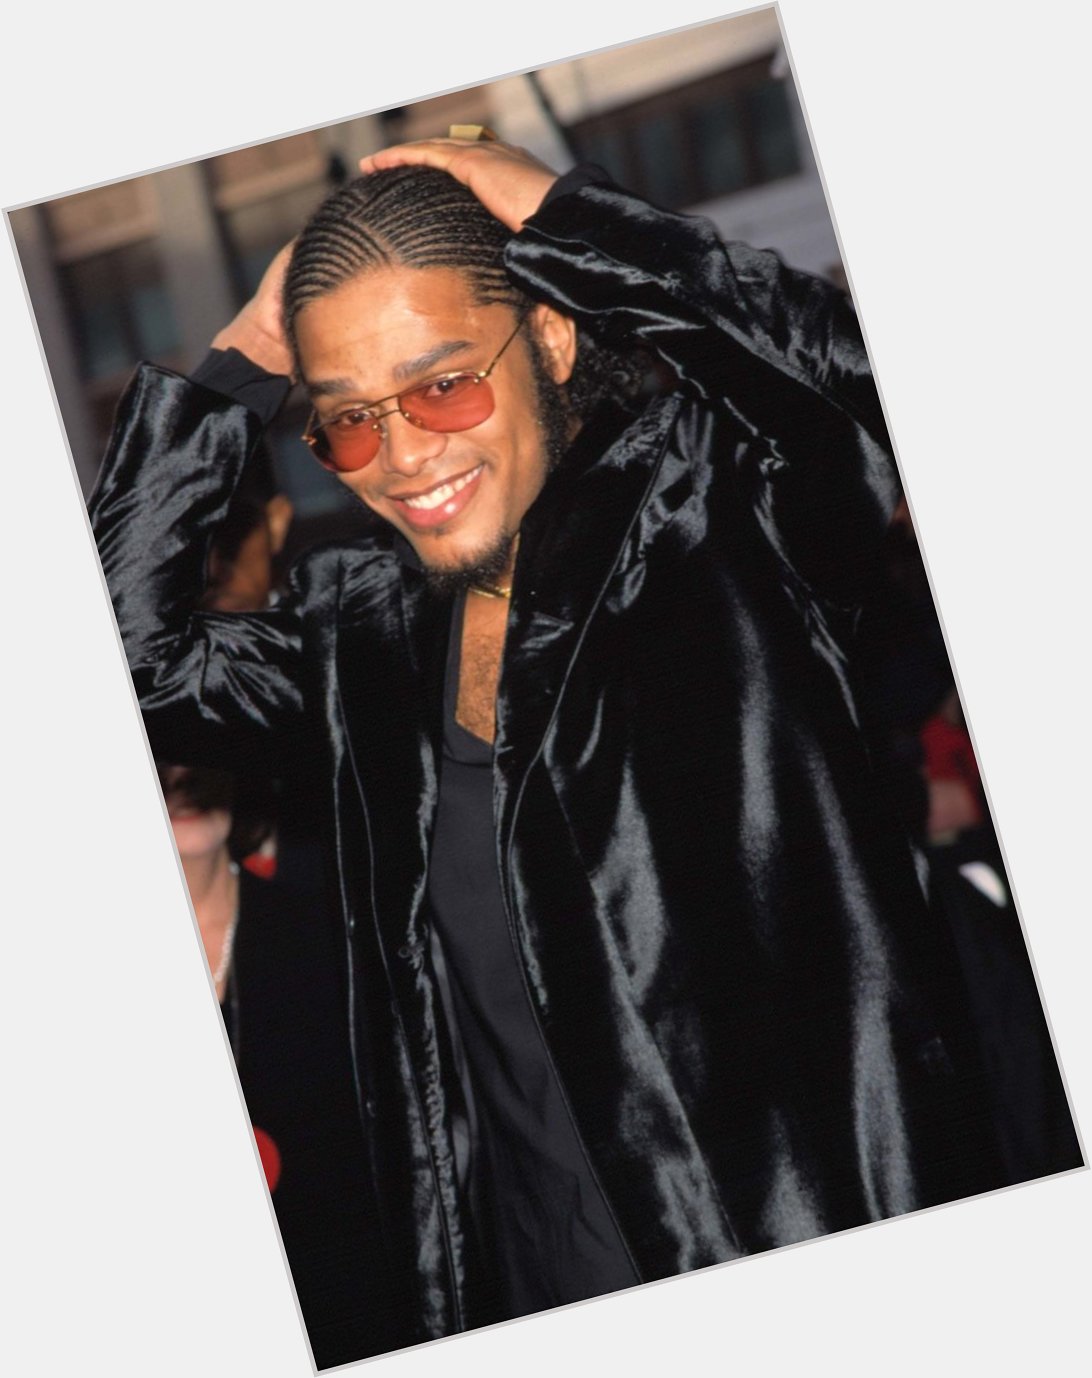 Happy 49th Birthday to the amazing Maxwell, One of the greatest voices of all time and a certified R&B Legend 